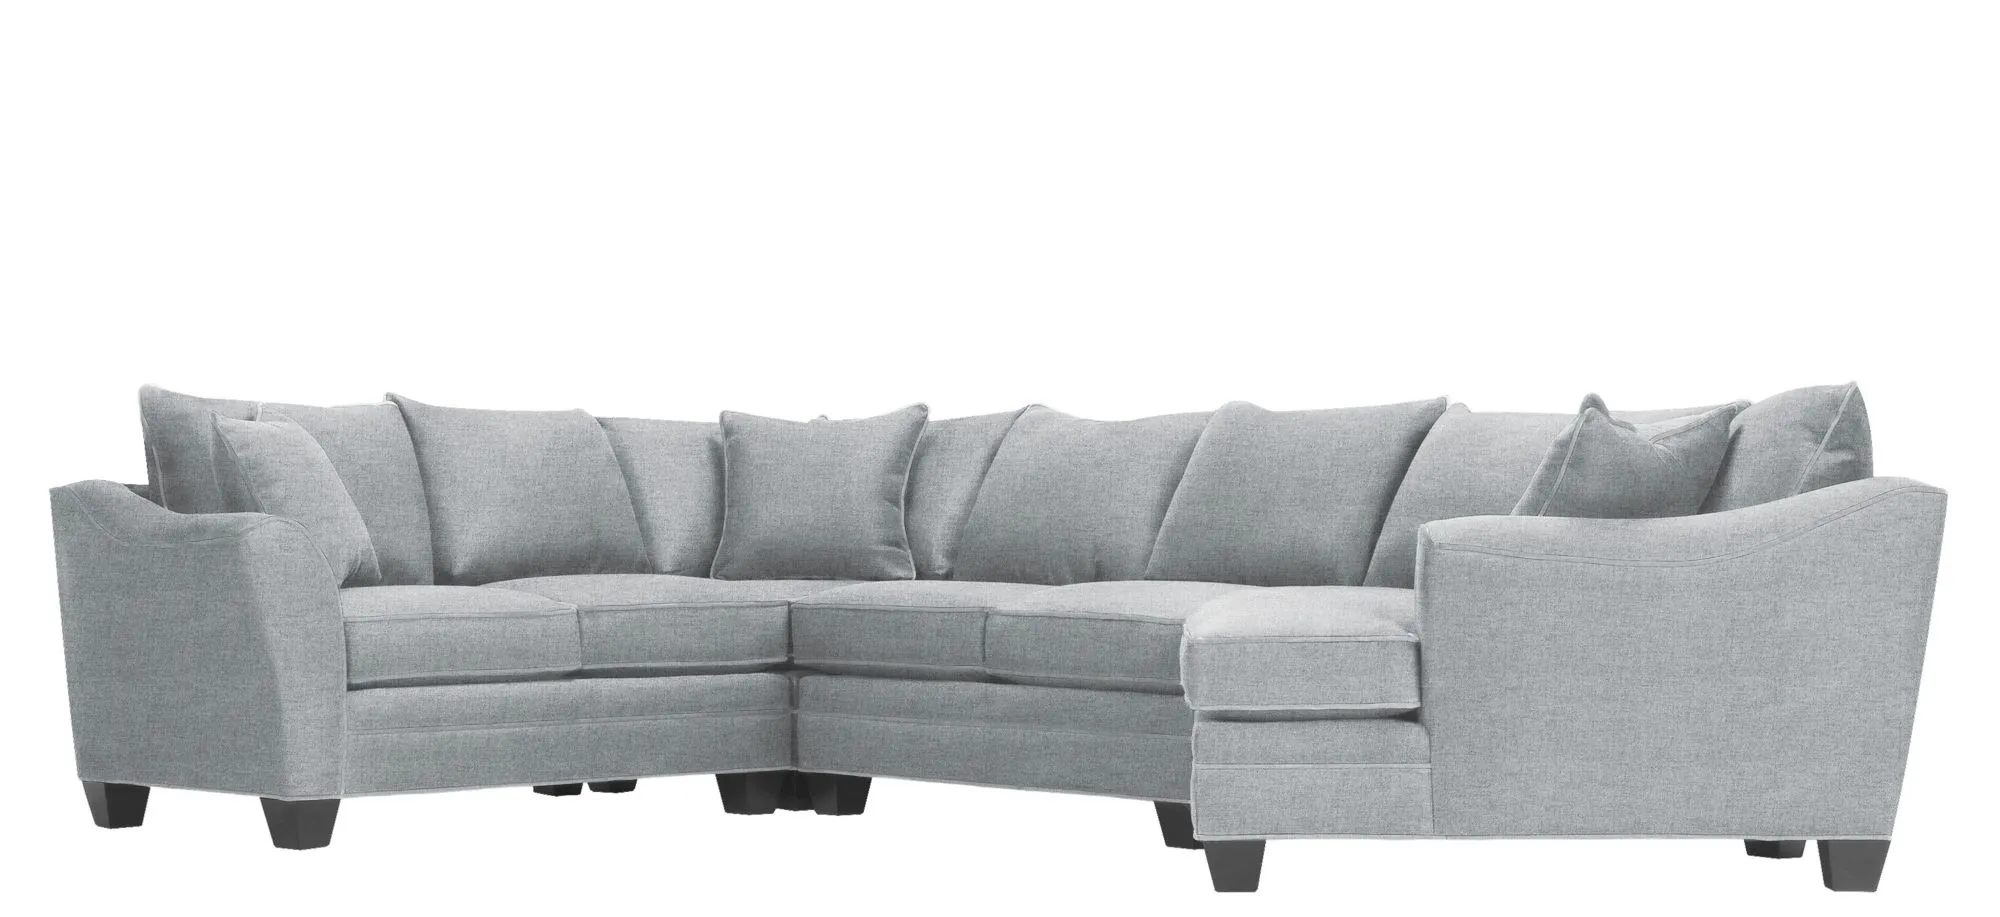 Foresthill 4-pc. Right Hand Cuddler with Loveseat Sectional Sofa in Santa Rosa Ash by H.M. Richards